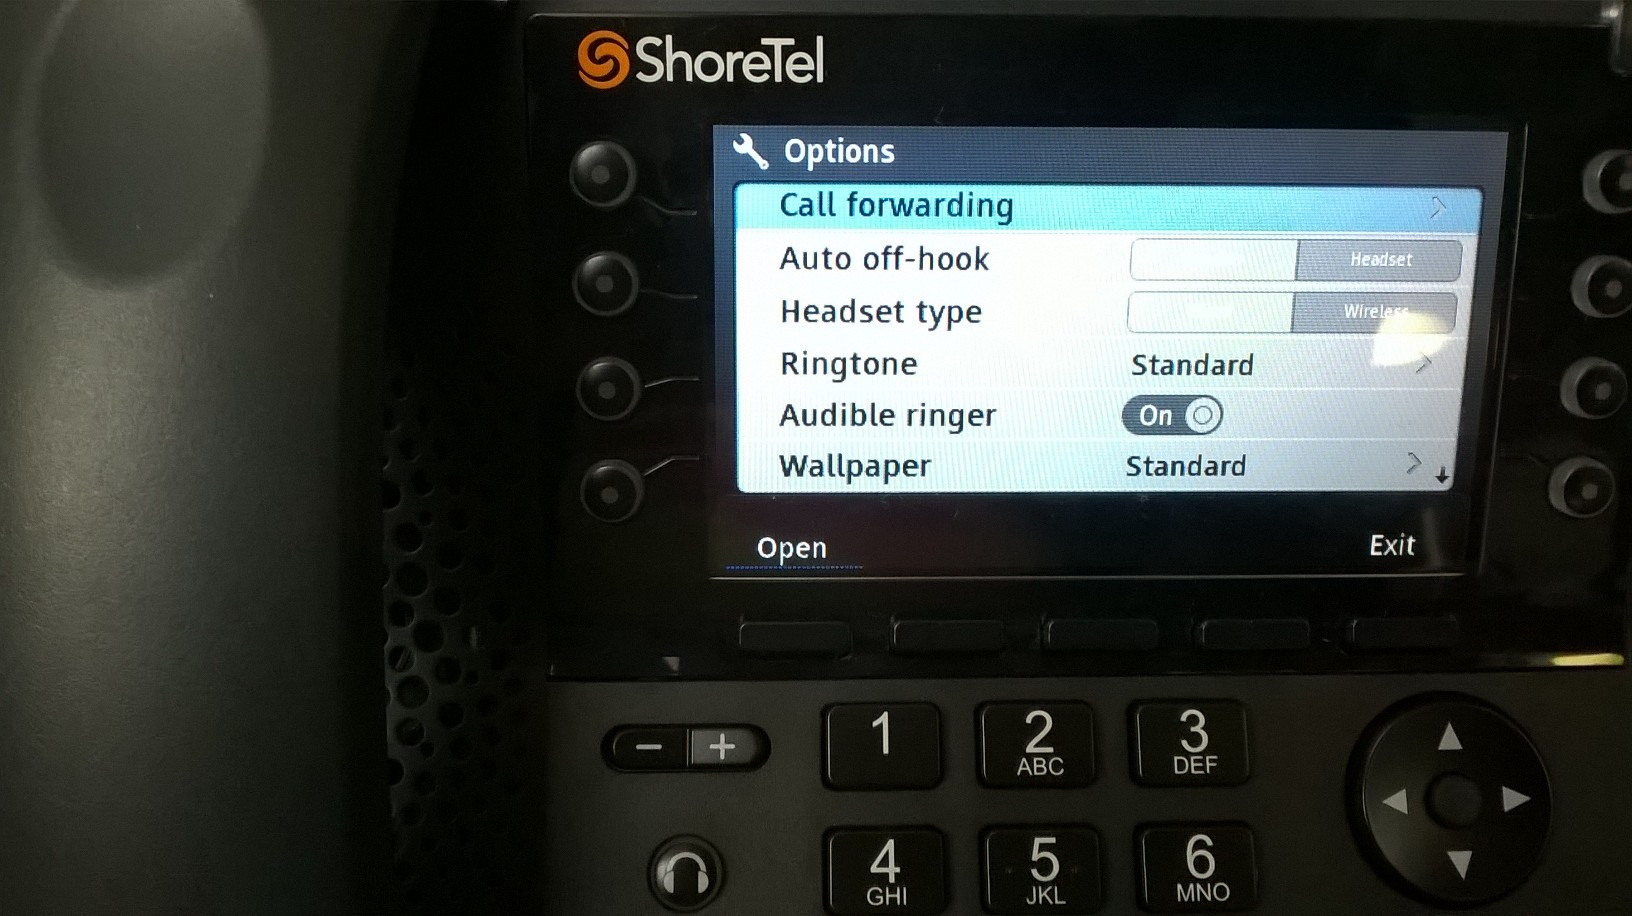 ShoreTel audo-off hook setting for wired headsets